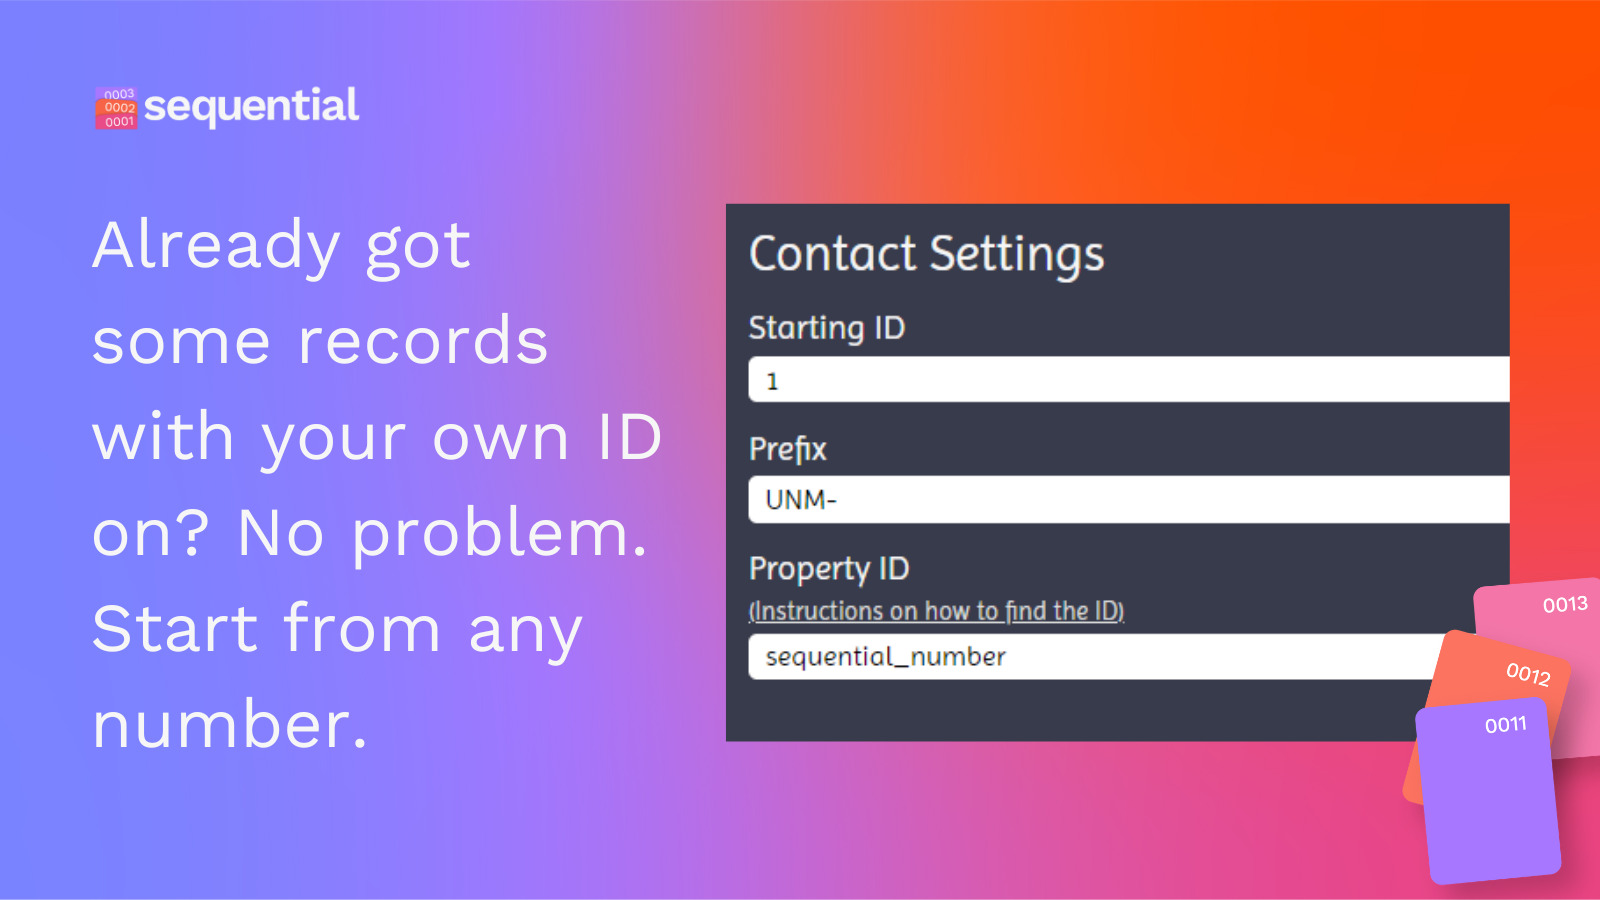 Already have records with your own IDs? No problem. You can start from any number.